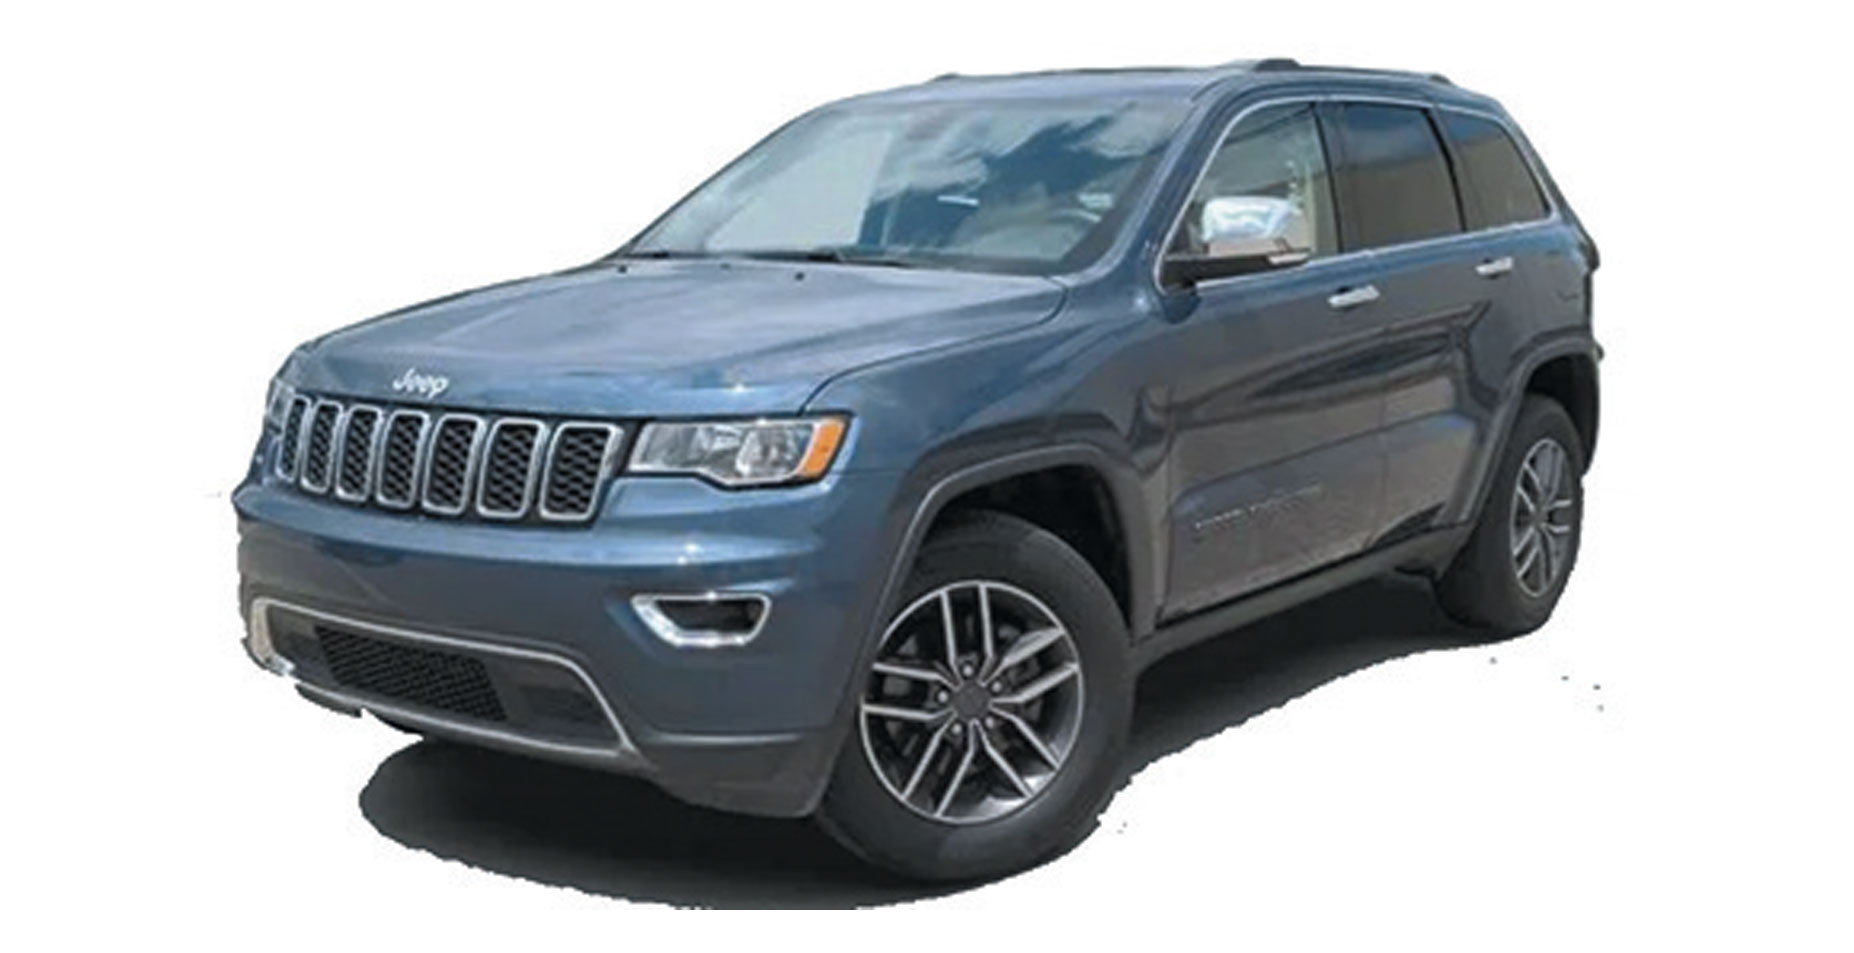 Pre-Owned 2020 JEEP Grand Cherokee Limited Sale Price $29,000**